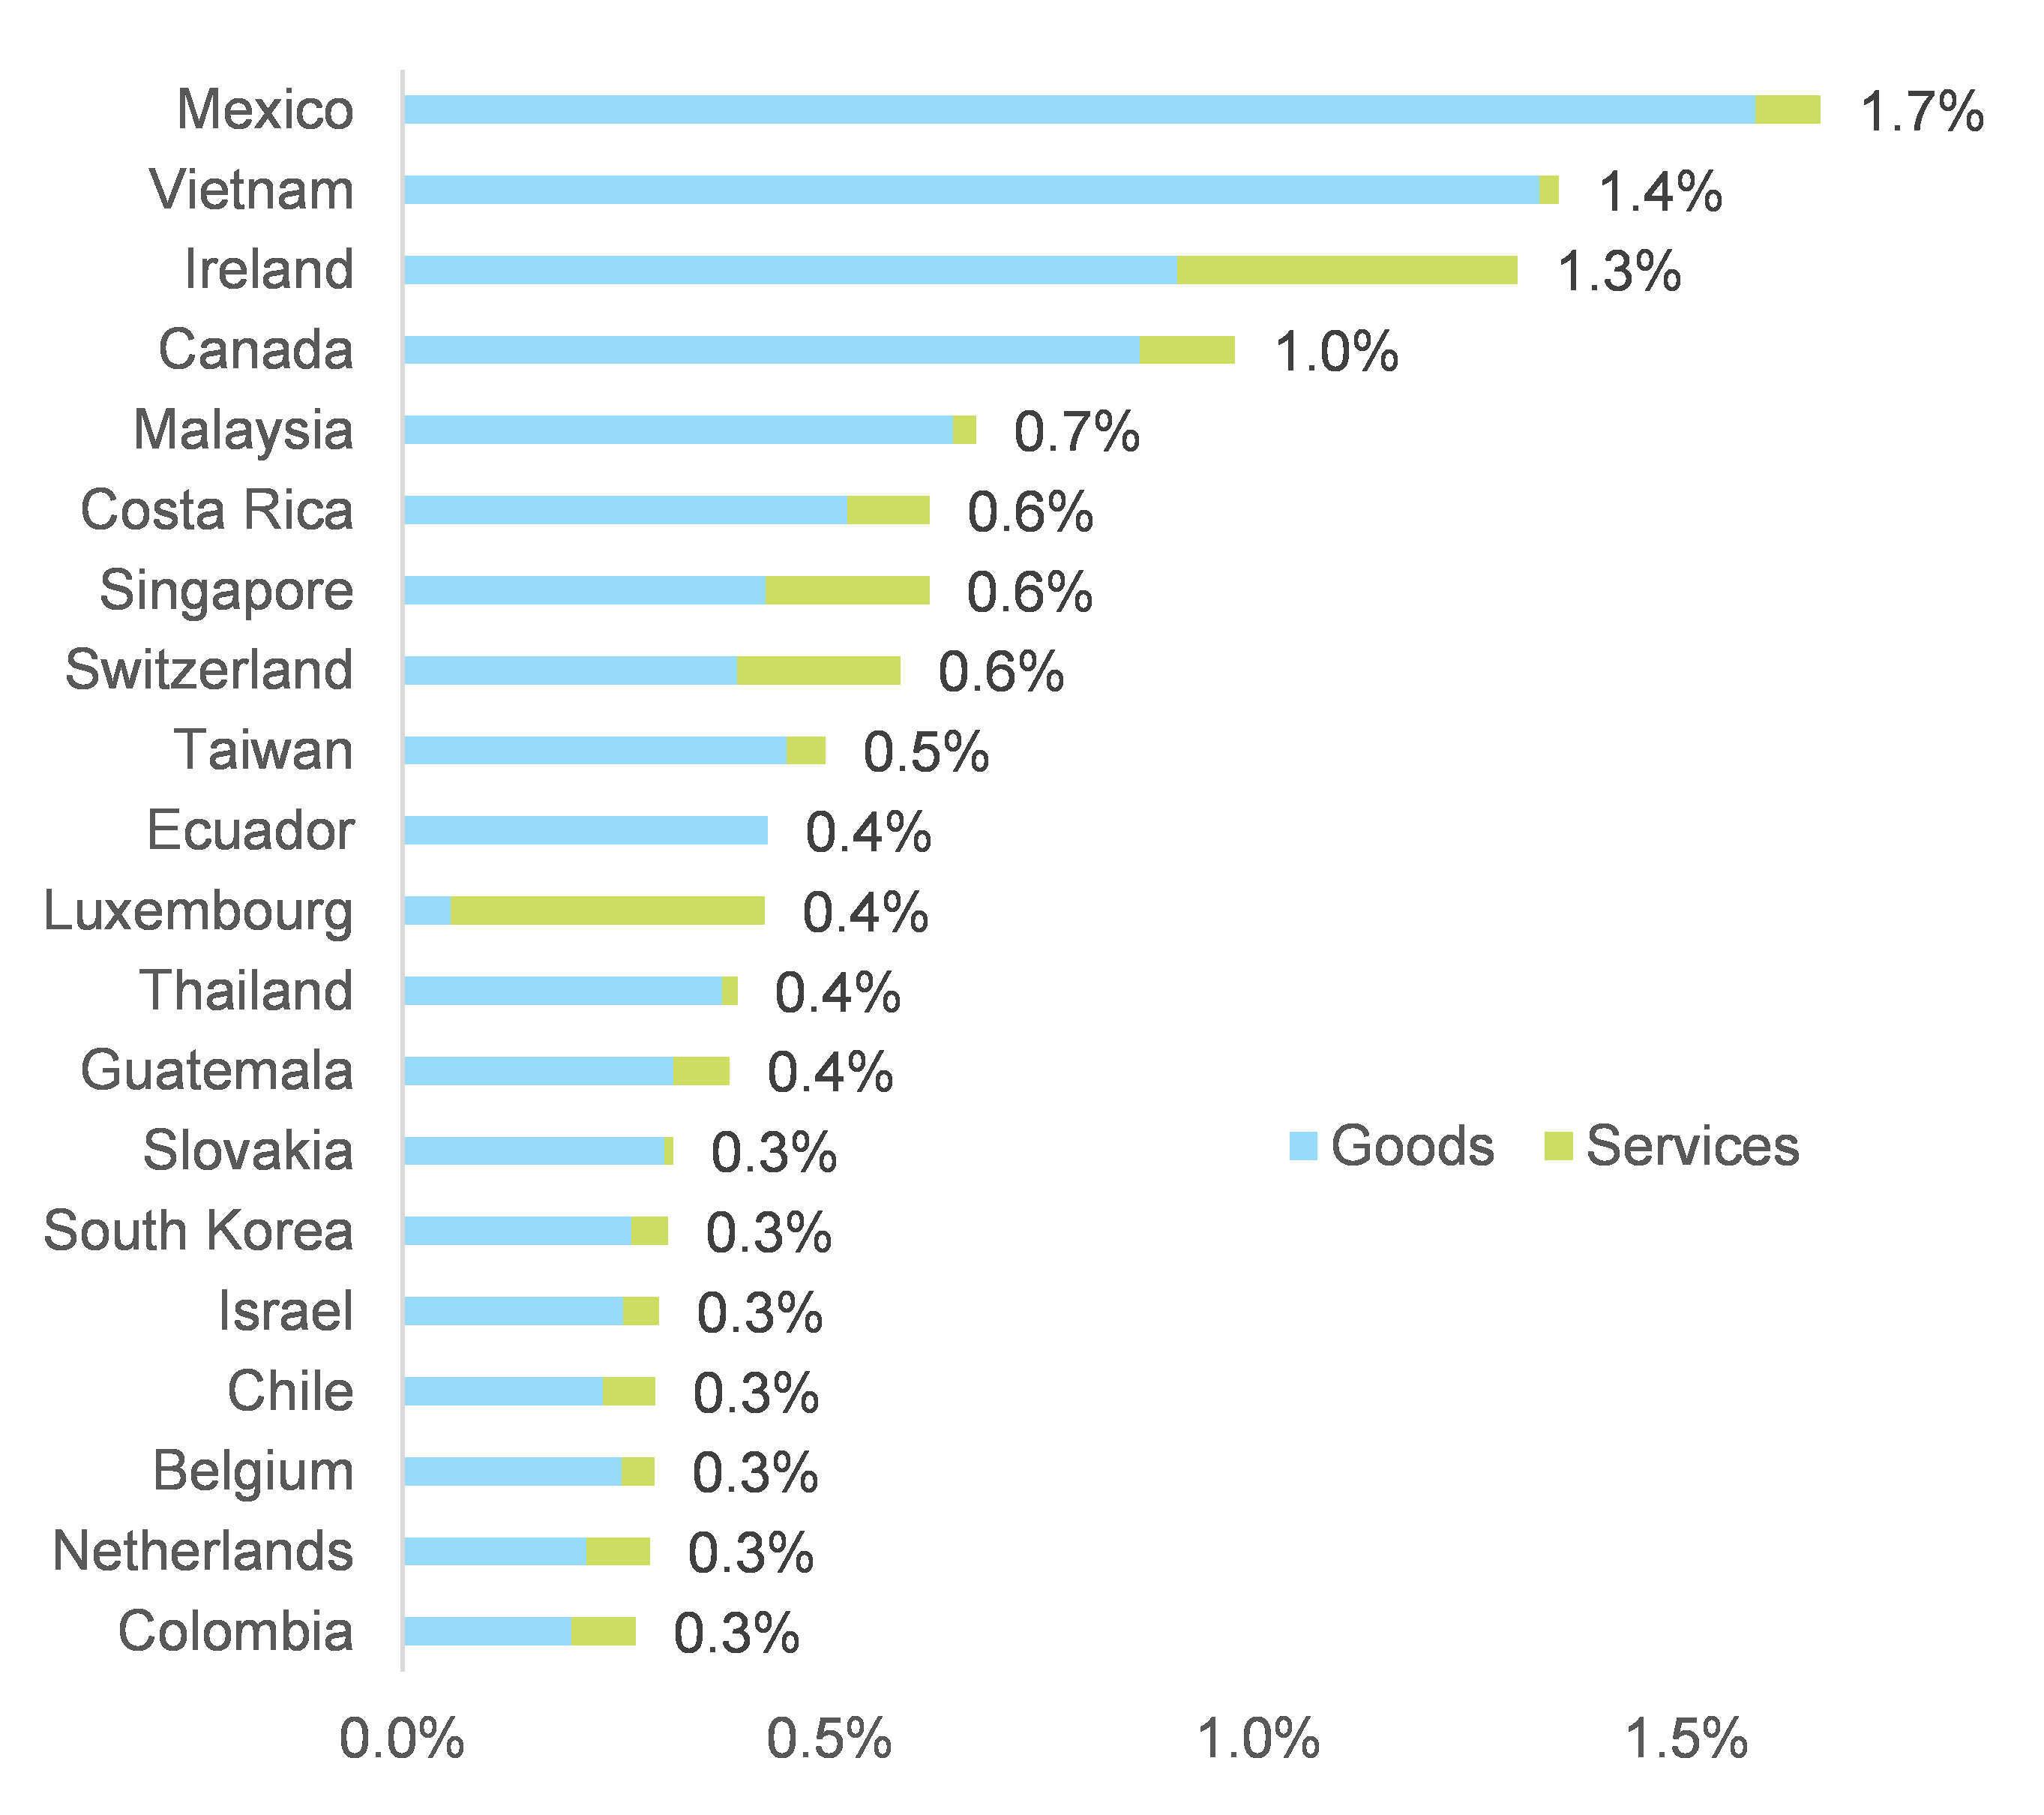 Figure 5 – Additional export gains in goods and services in 2021-2022 thanks to US stimulus, by country (% of 2021-2022 GDP)